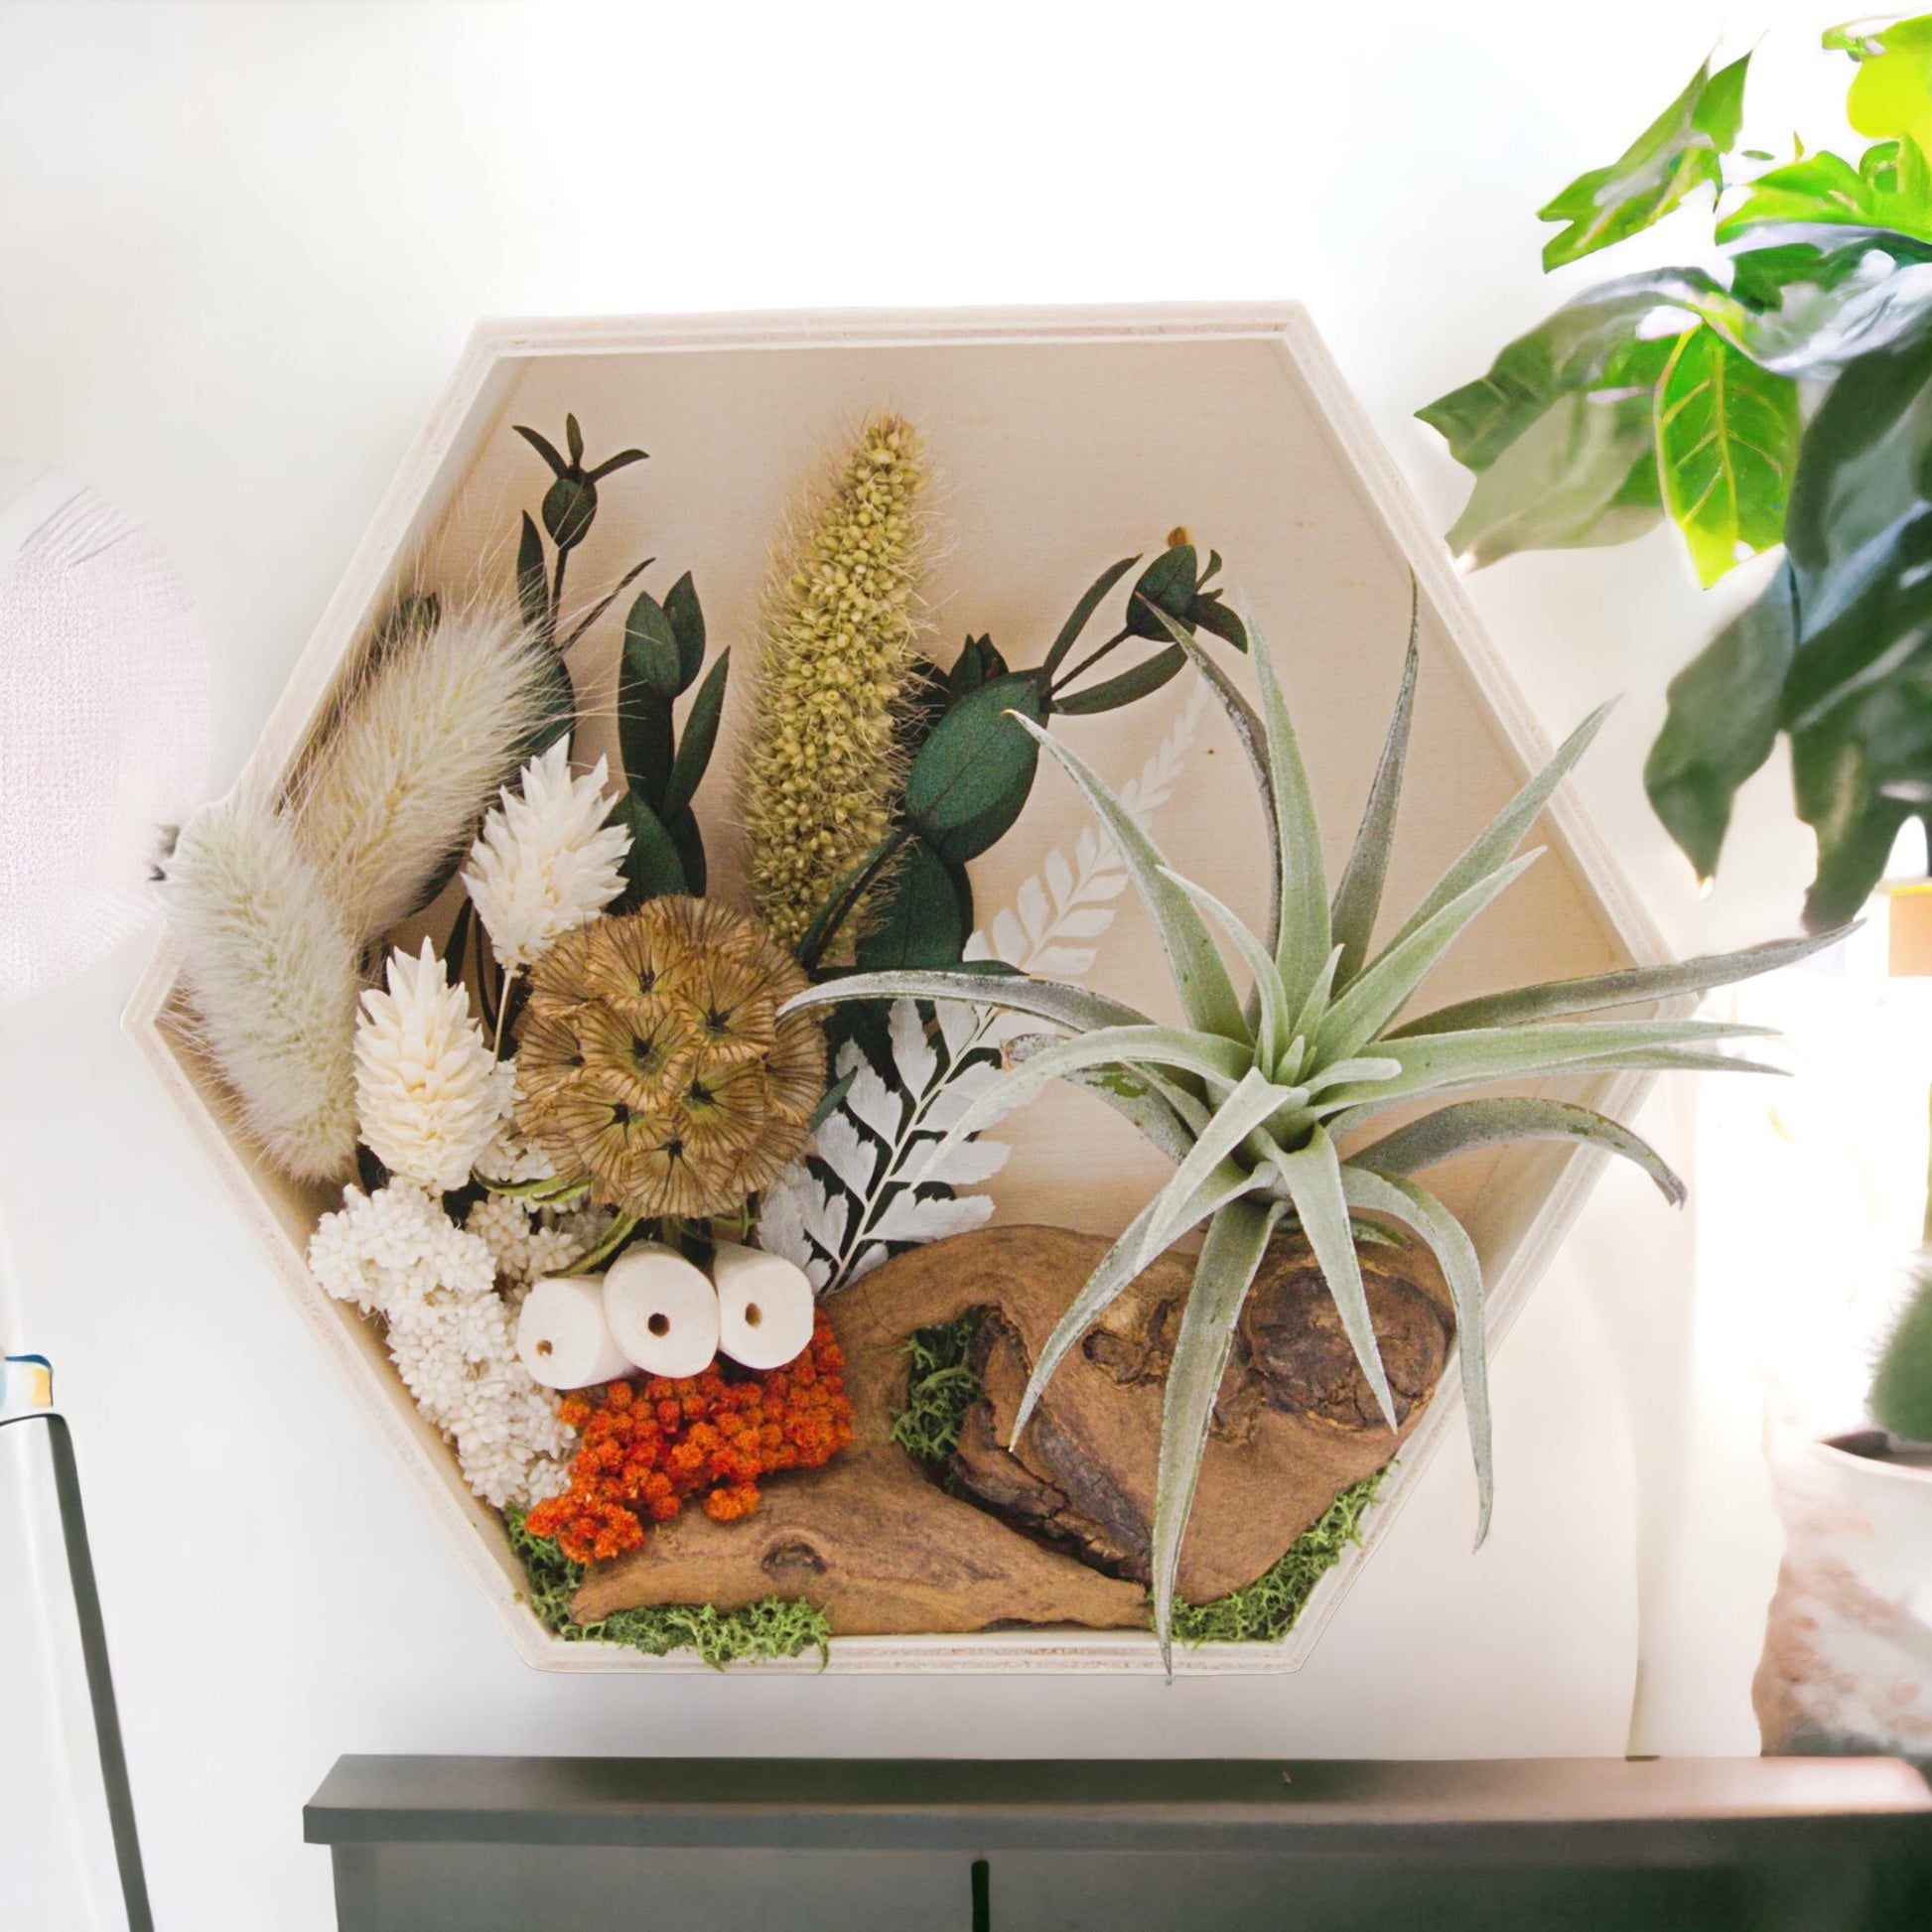 Wooden hexagon box frame filled with dried flowers, wood, moss and an airplant